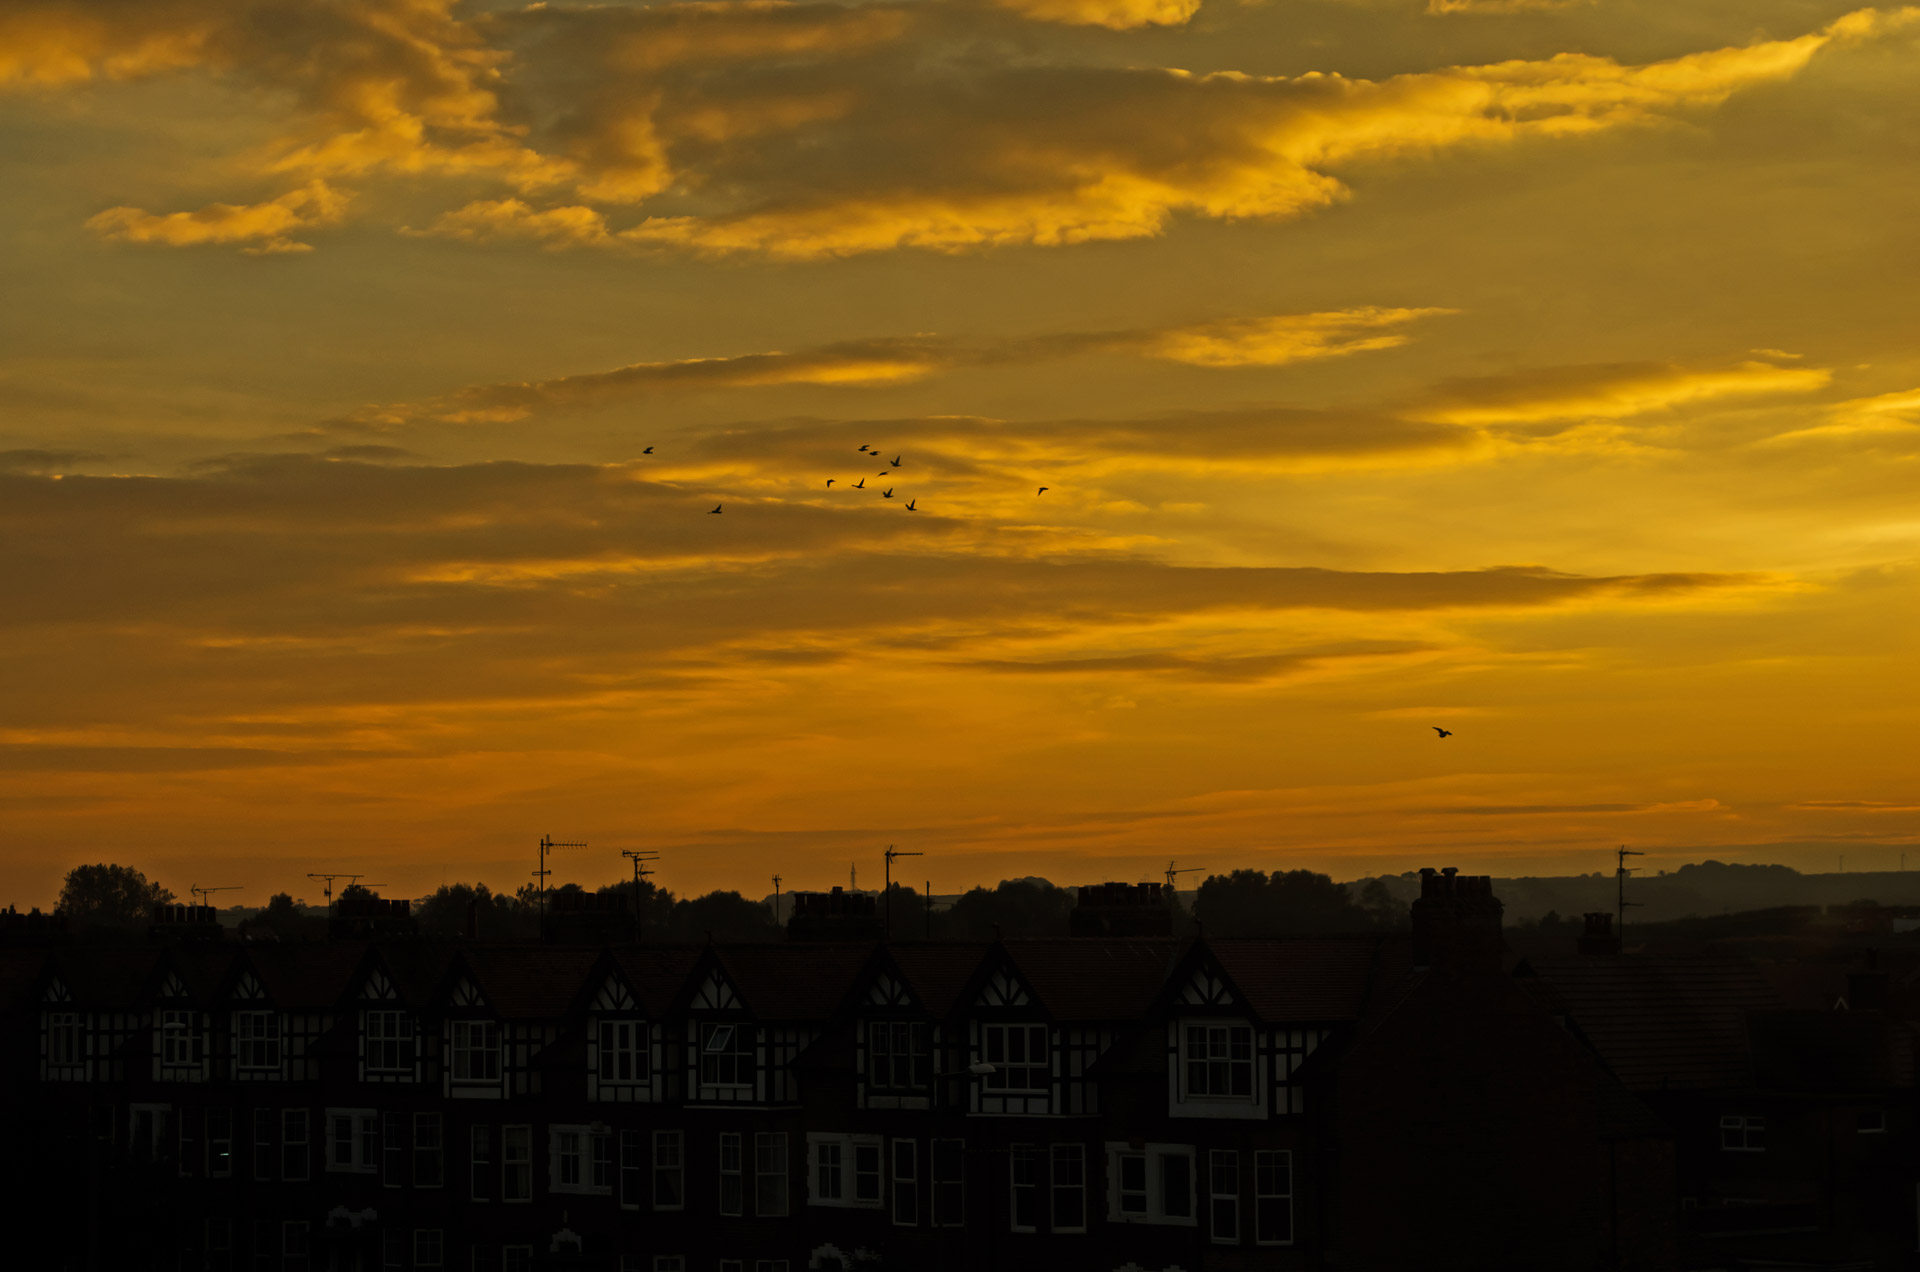 sunset,background,houses,house,city,england,evening,orange,red,night,nature,sun,clouds,cloudy,weather,sunset,free pictures, free photos, free images, royalty free, free illustrations, public domain